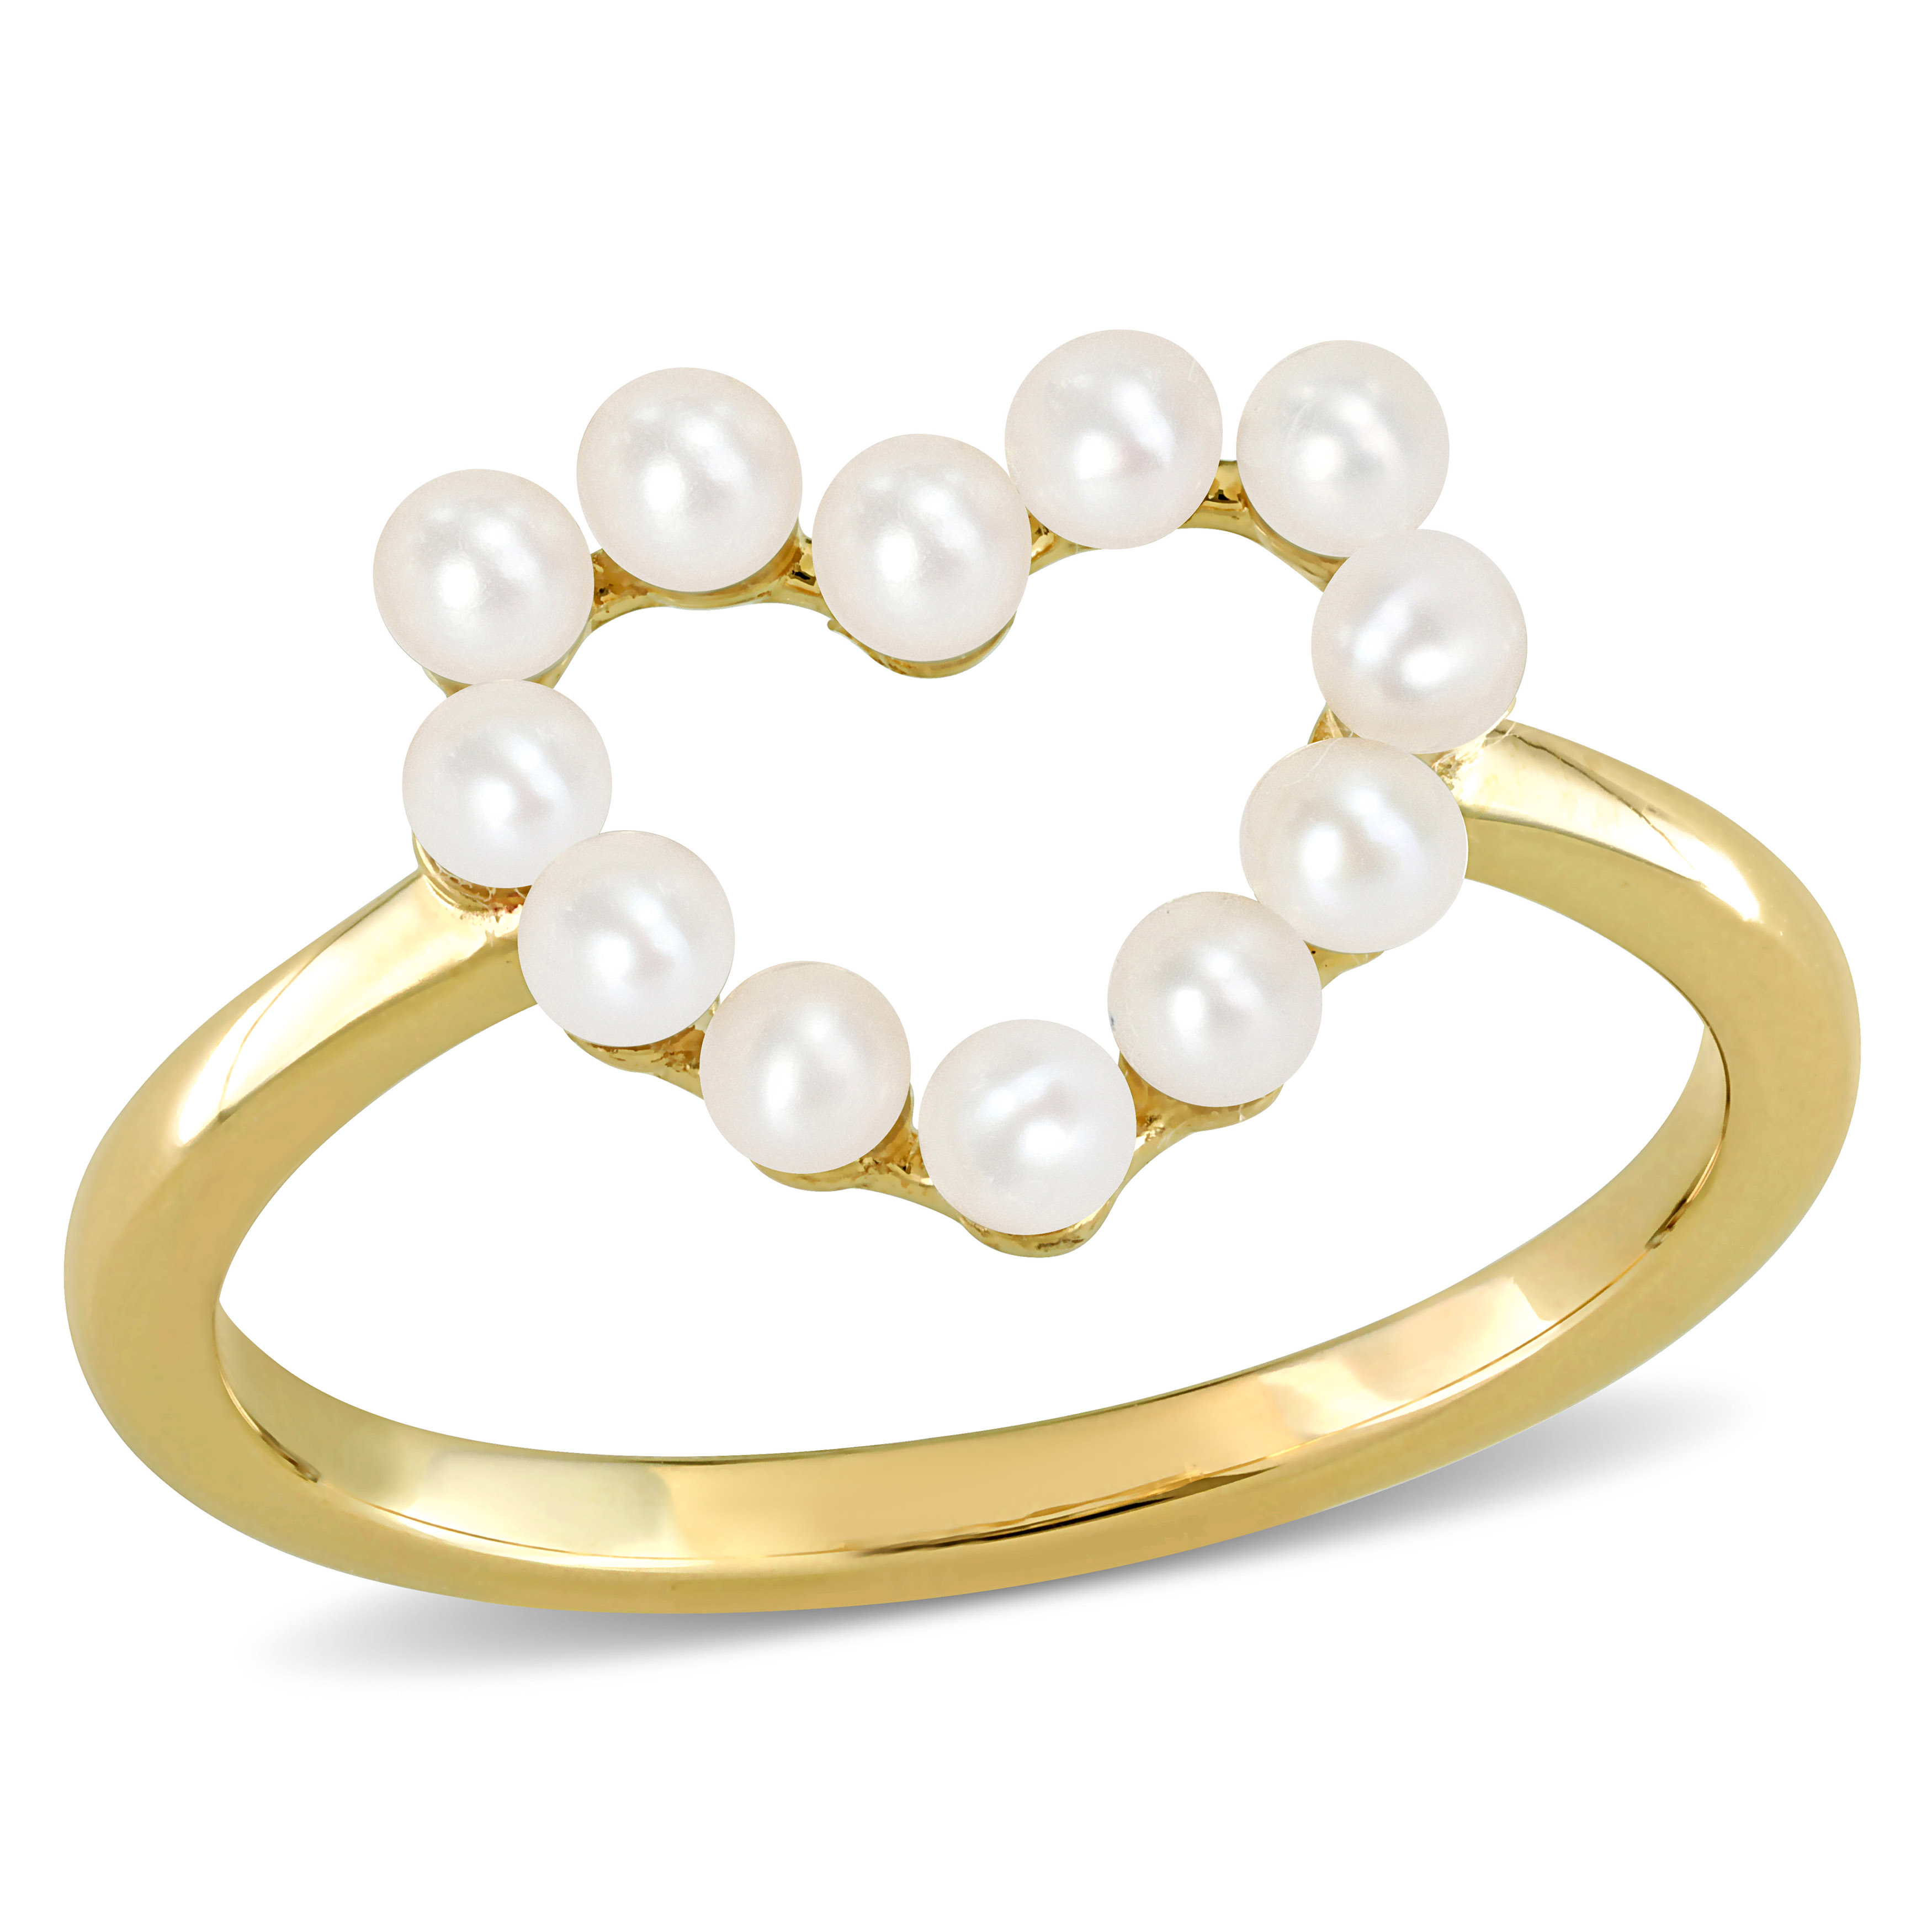 2-2.5 MM Cultured Freshwater Pearl Heart Ring in 14k Yellow Gold